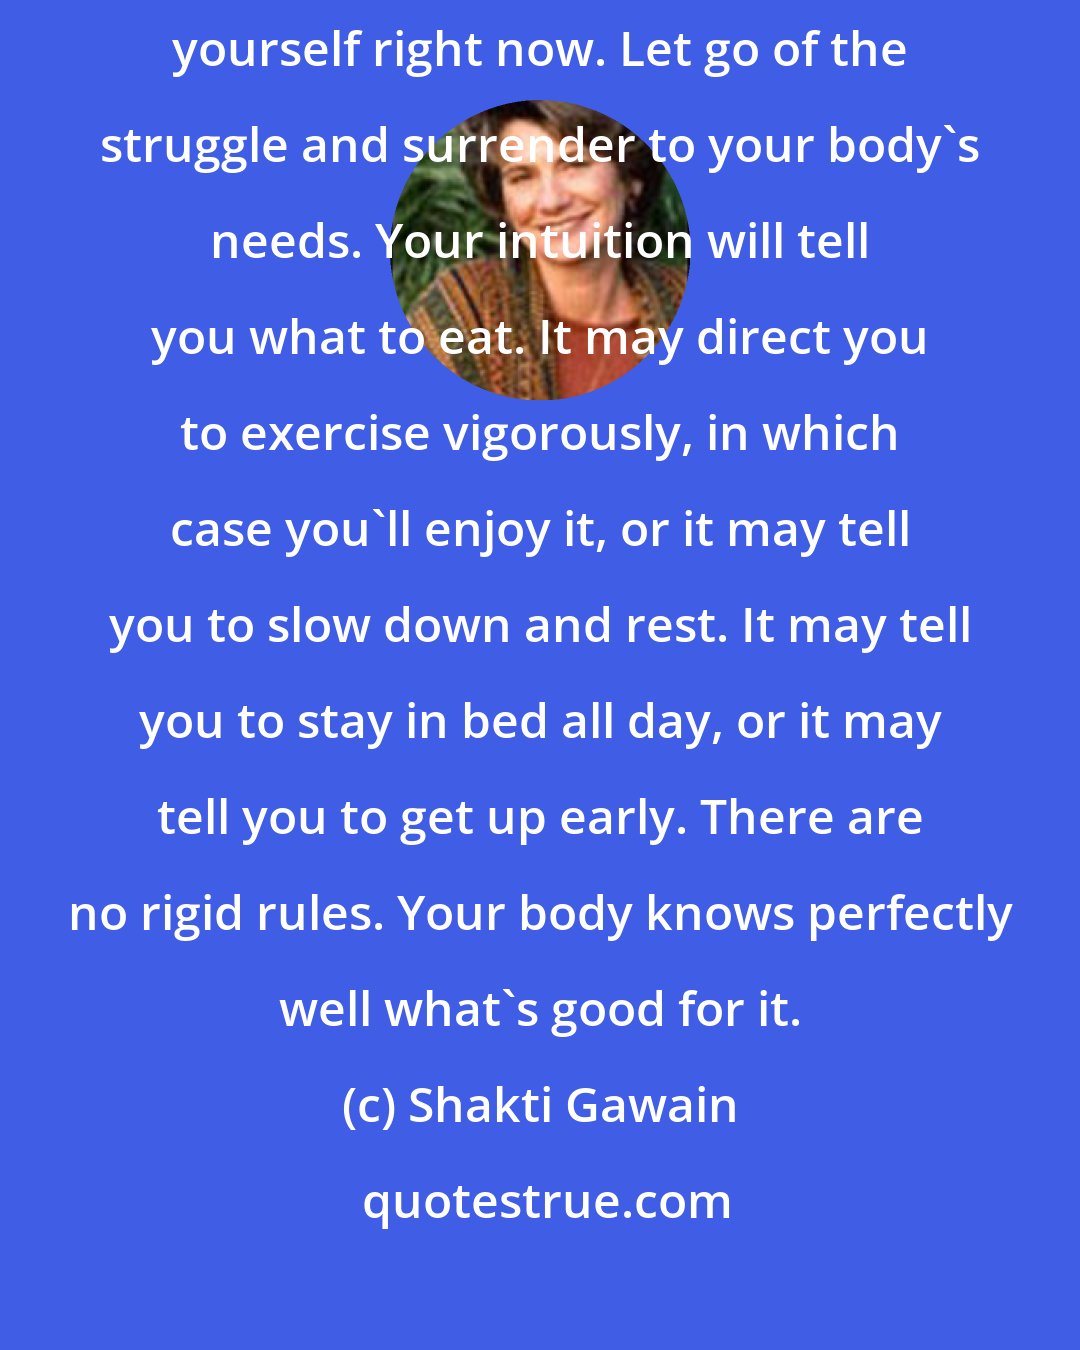 Shakti Gawain: The way to a beautiful, strong, healthy body is to start by trusting yourself right now. Let go of the struggle and surrender to your body's needs. Your intuition will tell you what to eat. It may direct you to exercise vigorously, in which case you'll enjoy it, or it may tell you to slow down and rest. It may tell you to stay in bed all day, or it may tell you to get up early. There are no rigid rules. Your body knows perfectly well what's good for it.